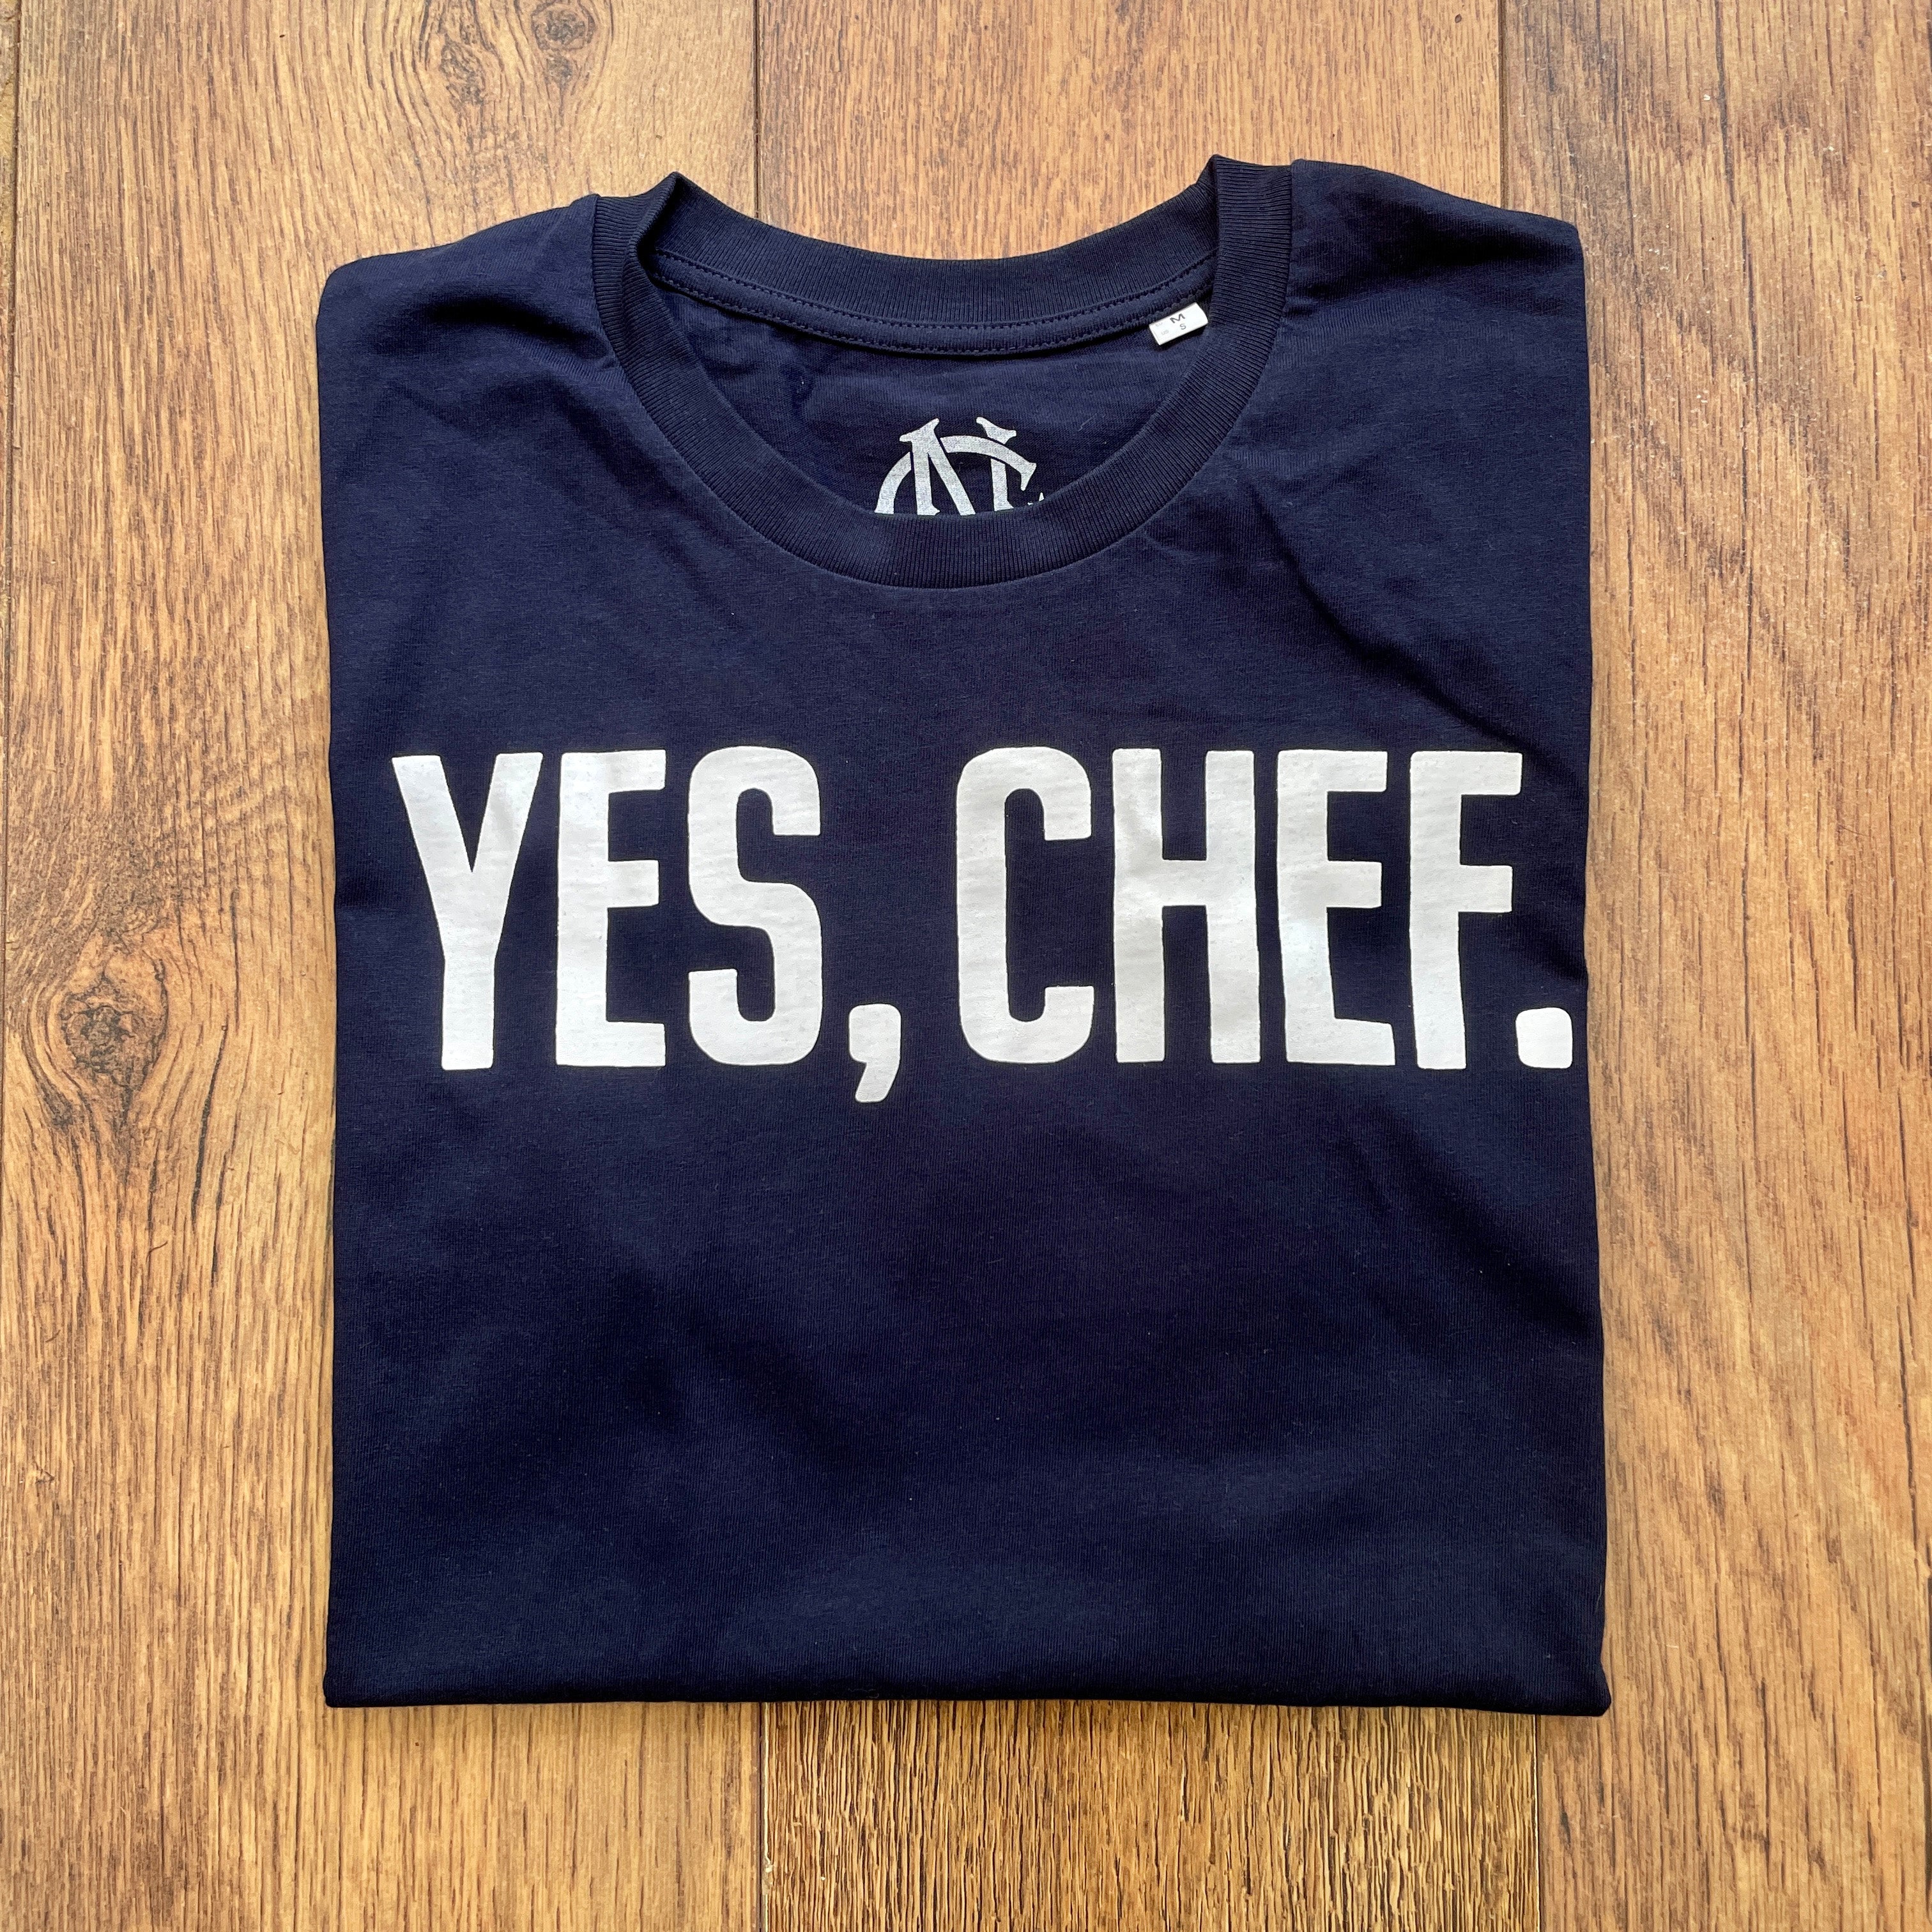 The Bear TV Yes Chef t-shirt